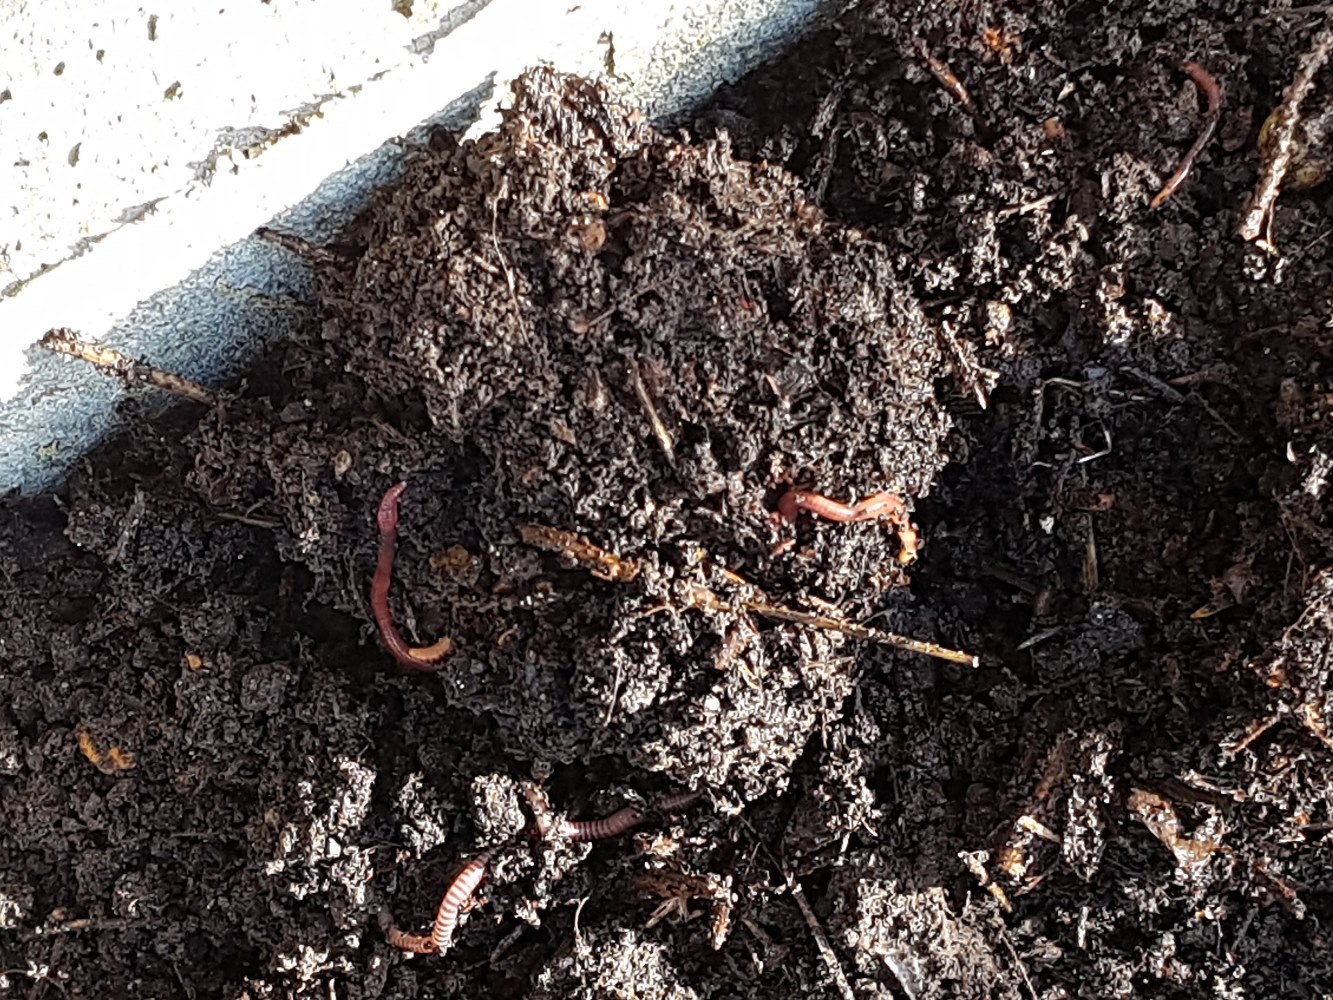 5 unheard facts about soil that defines how it is helping the environment!